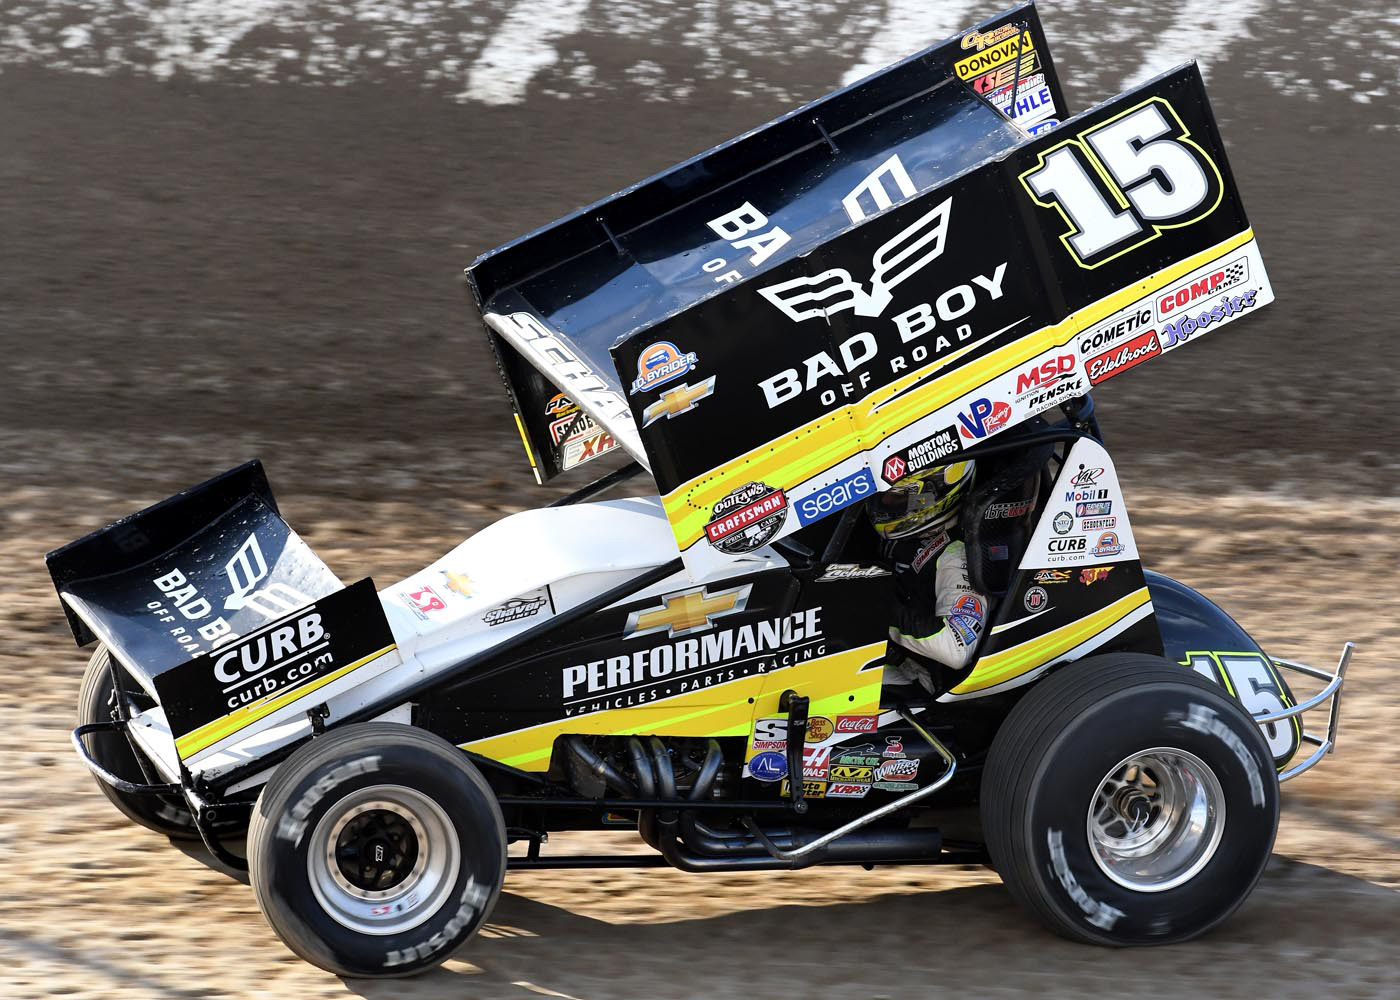 Donny Schatz on X: It's crazy how living a competitive racing life,  consumes a persons normal everyday life. I grew up with this guy. Last time  I saw him was roughly 15